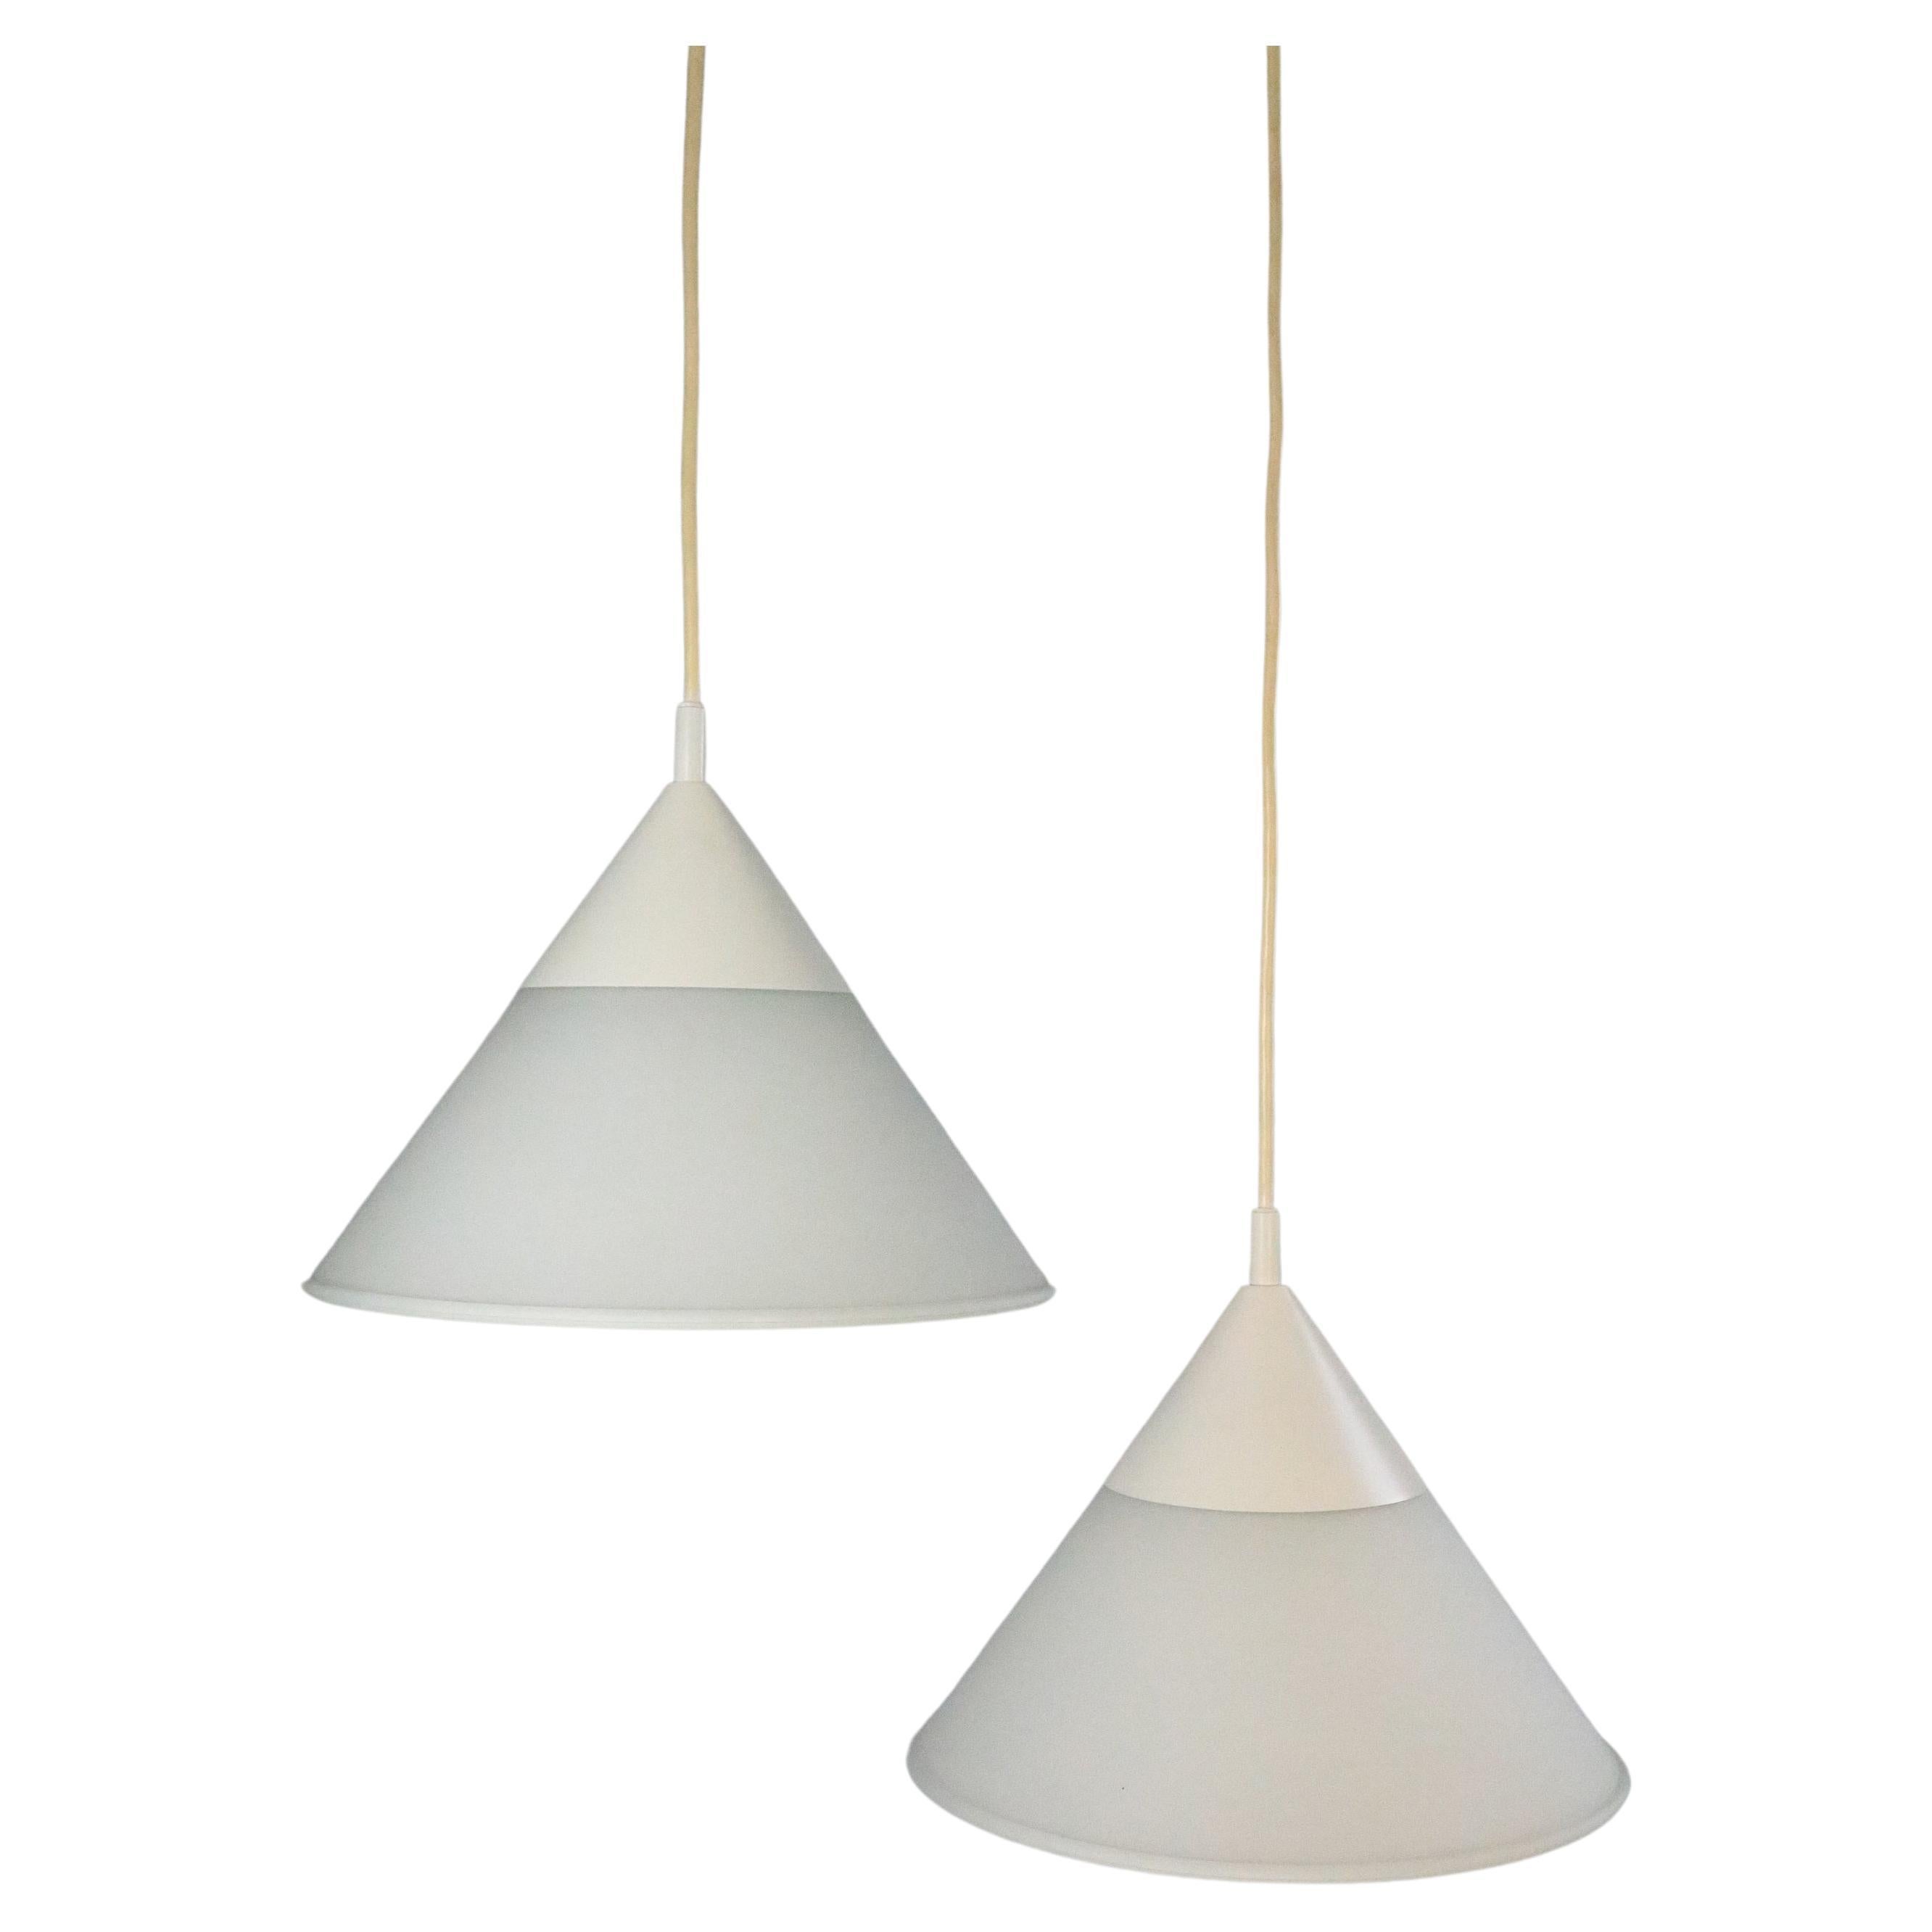 Set of 2 German Hanging Lamps by LIMBURG, Frosted Glass, 1970s